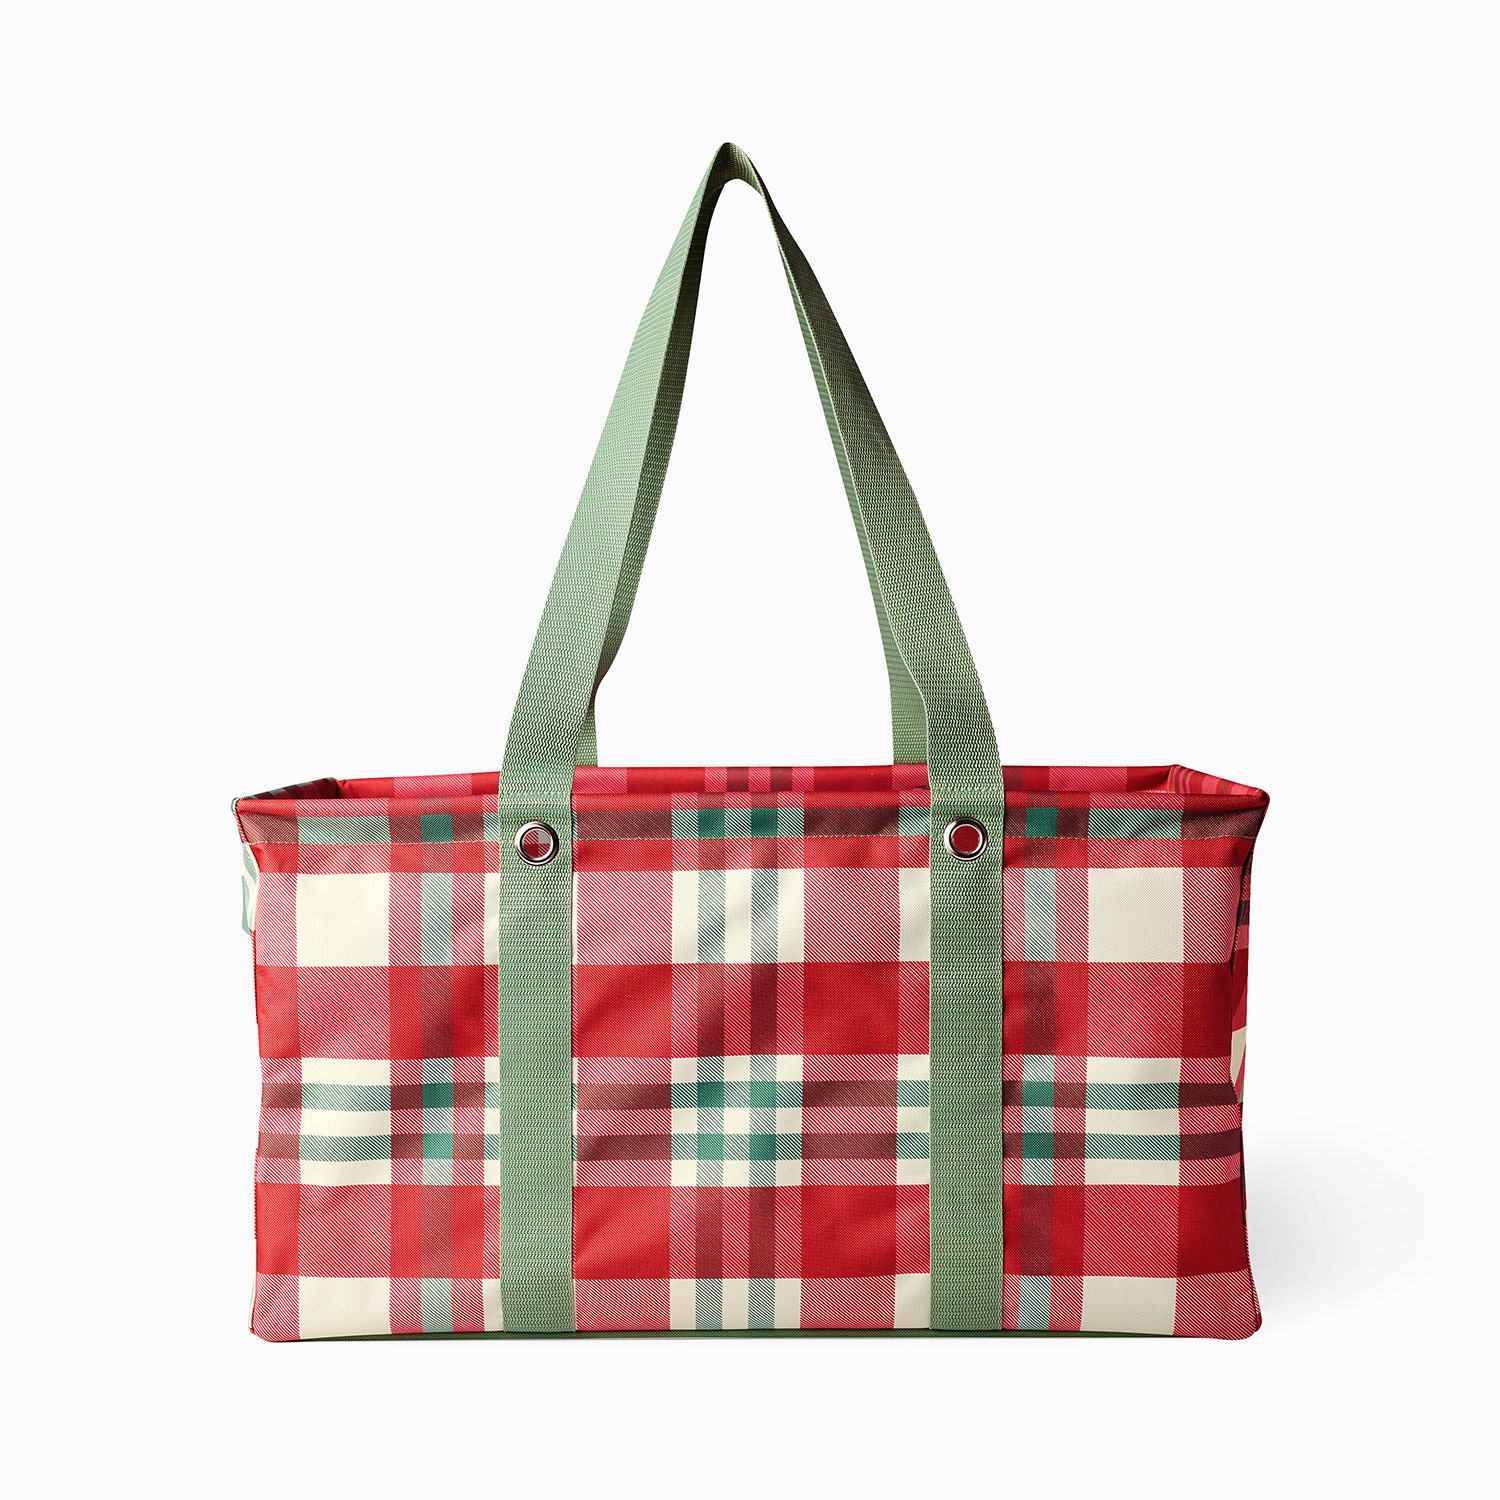 thirty-one deluxe utility tote